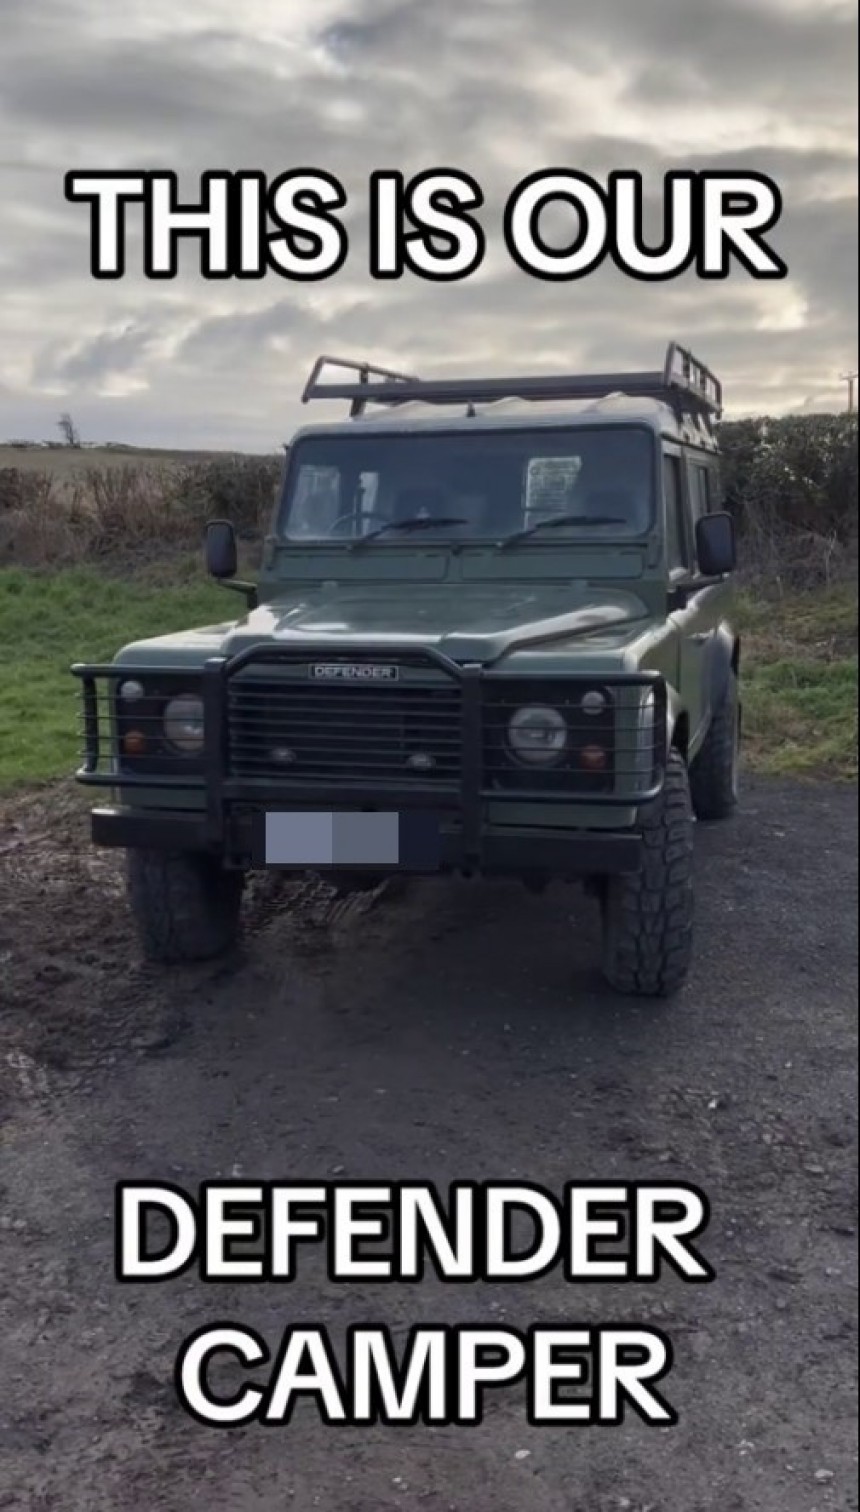 1988 Land Rover Defender 110 has been converted into a camper, is ready to hit the road